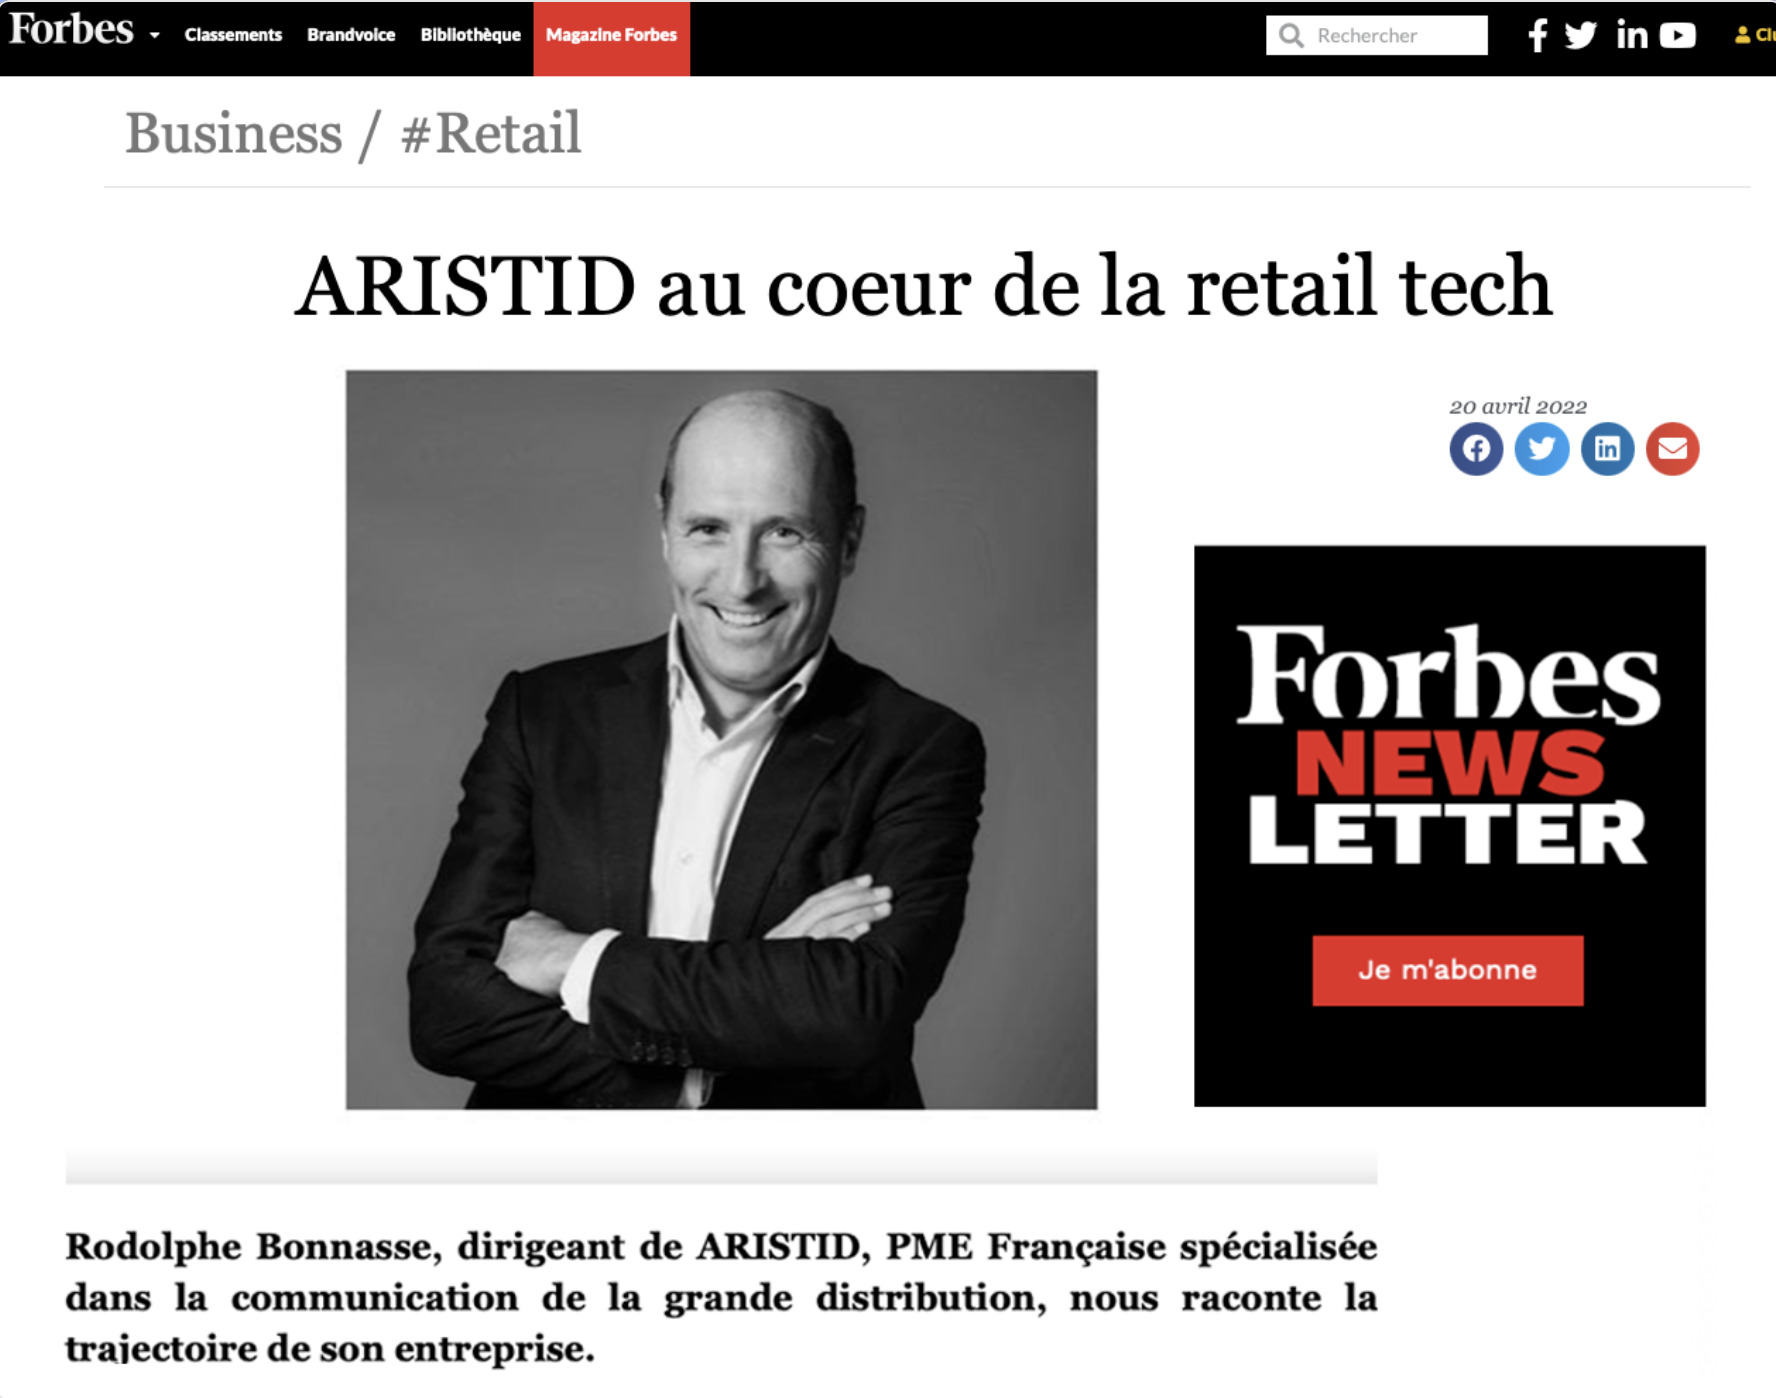 ARISTID at the heart of Retail Tech / FORBES